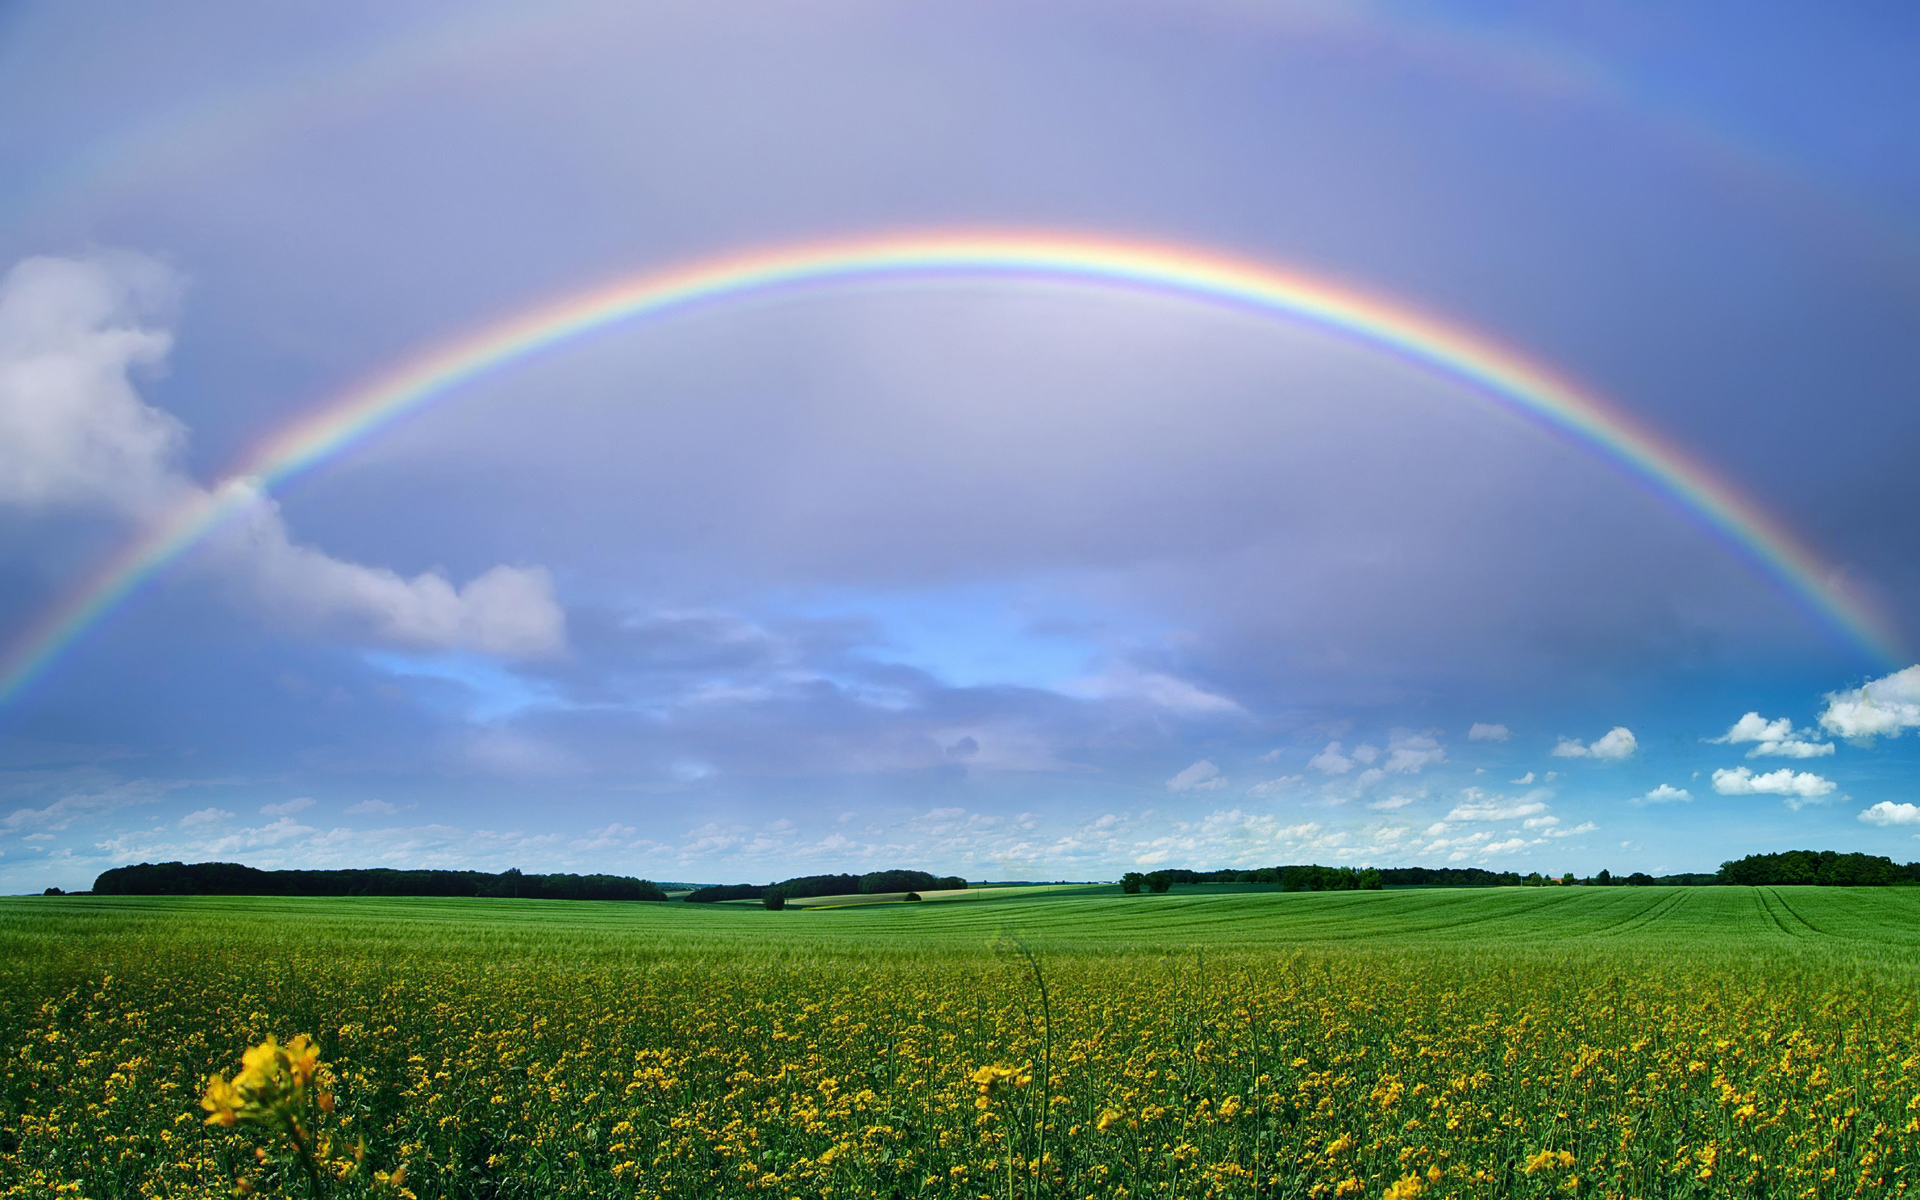 A rainbow can be seen only in the morning or late afternoon. It can occur only when the sun is 40 degrees or less above the horizon.